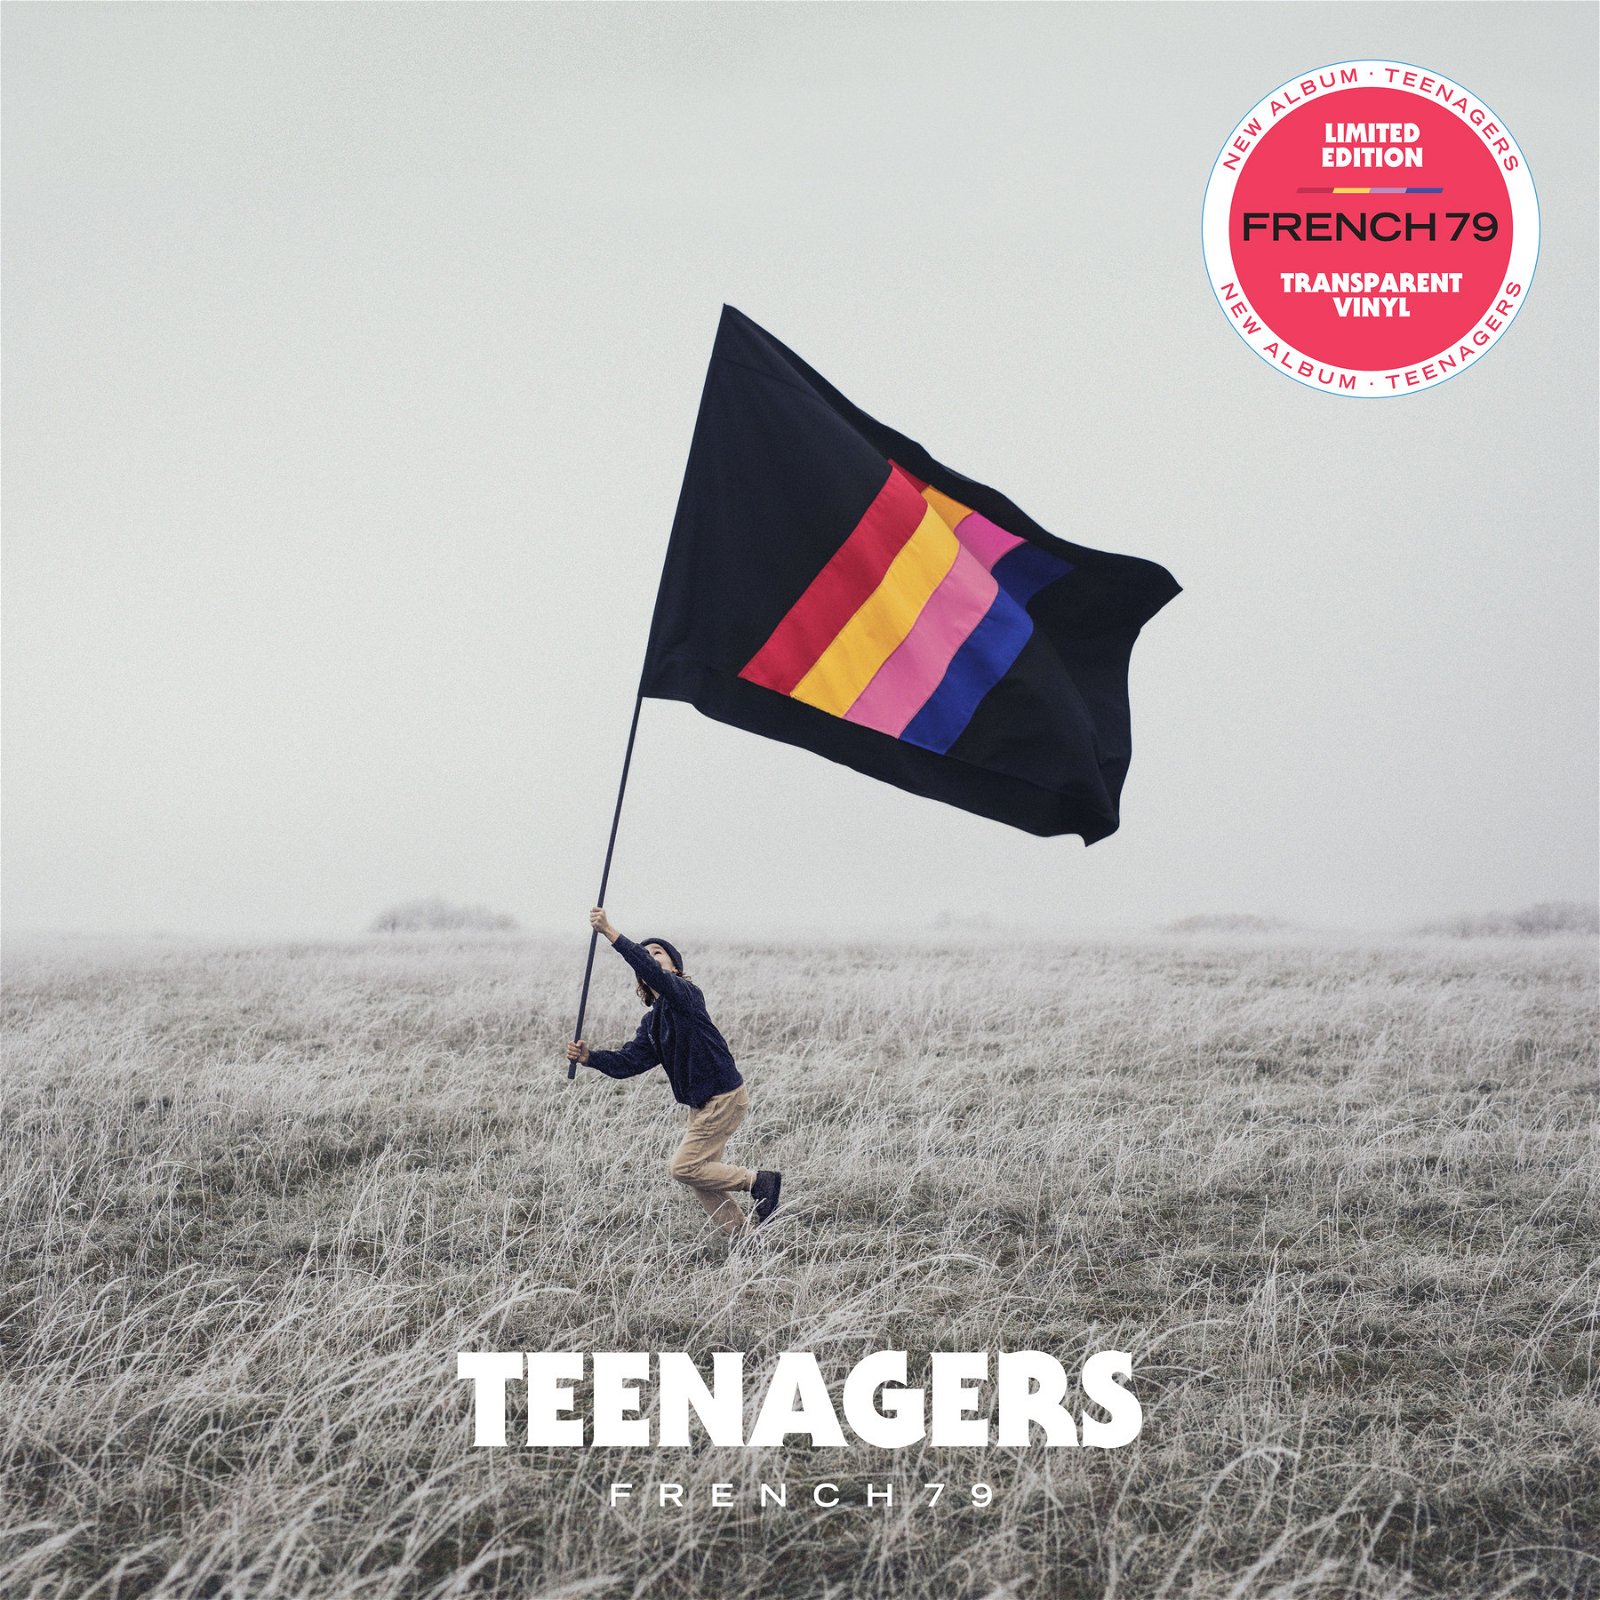 CD Shop - FRENCH 79 TEENAGERS